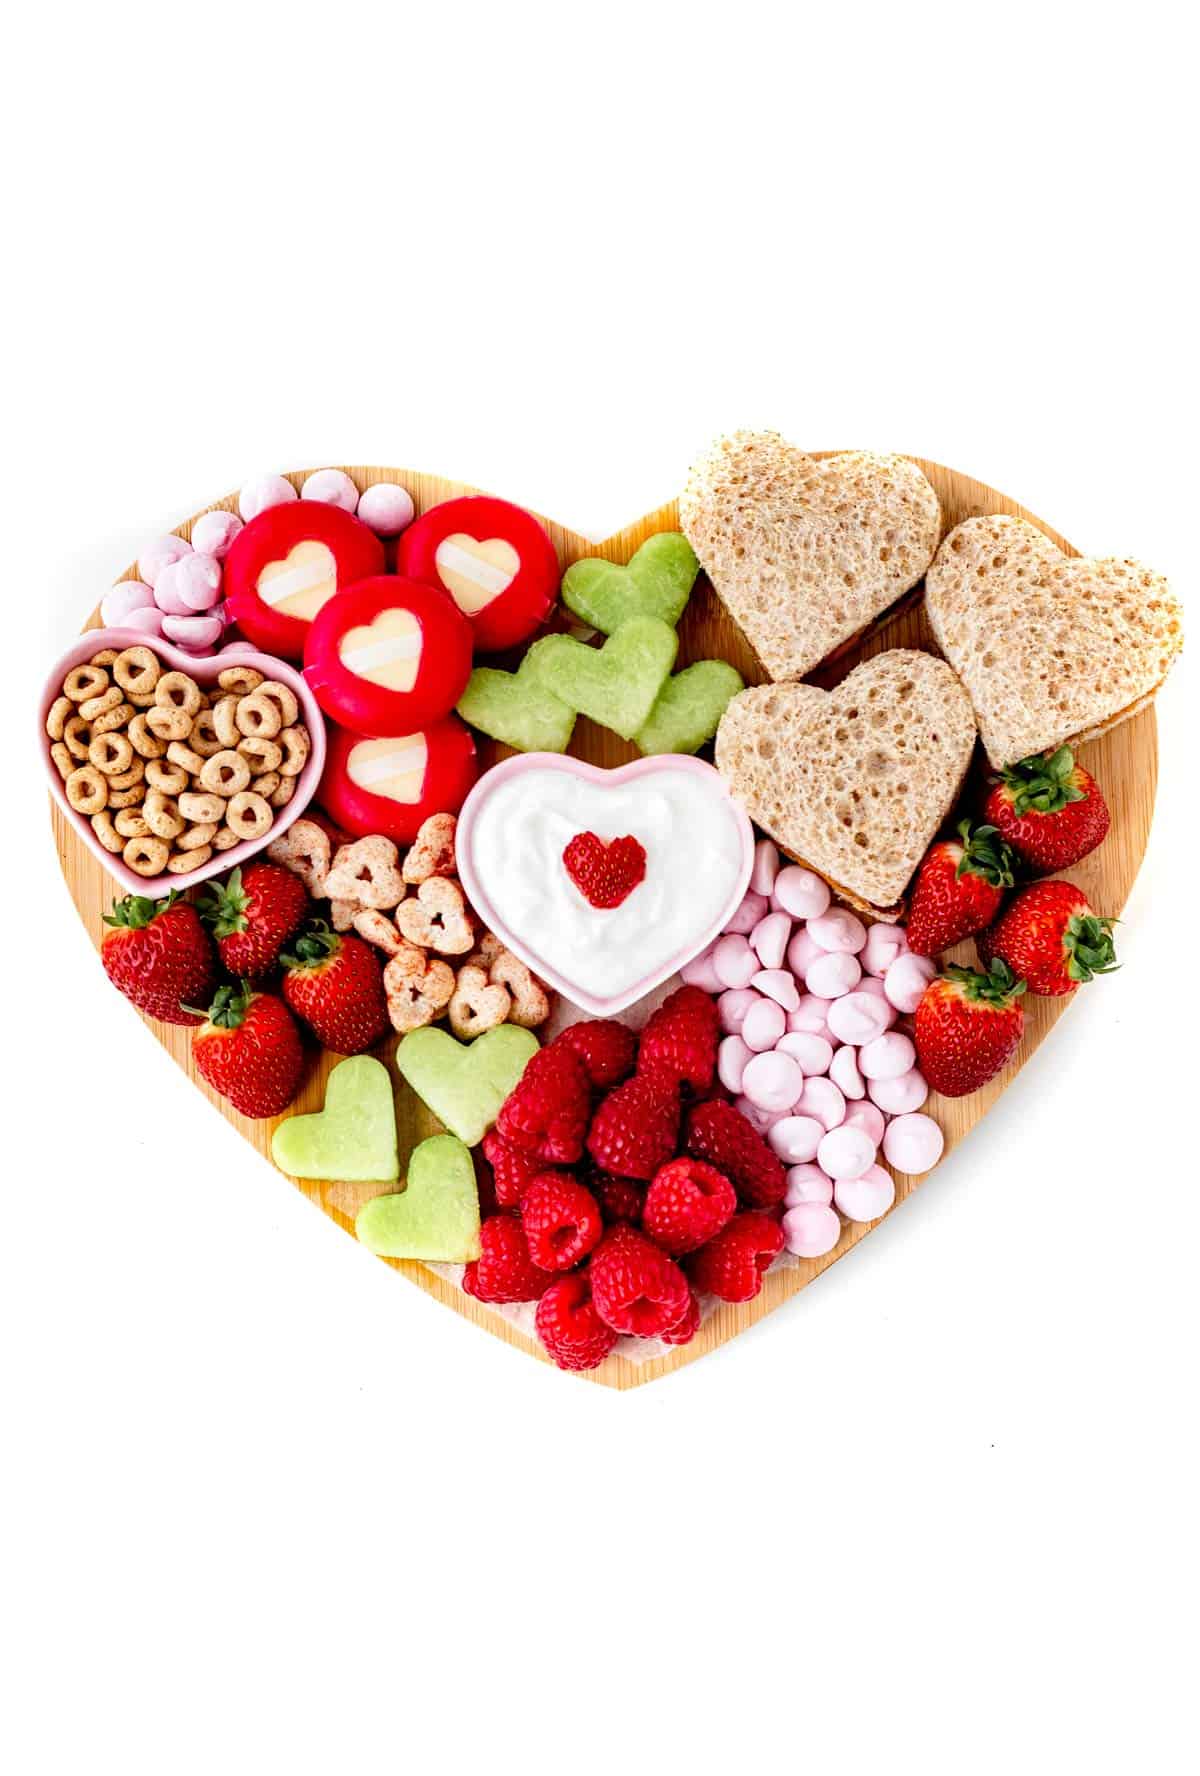 A birds-eye view of the heart-shaped snacks on a heart shaped charcuterie board.